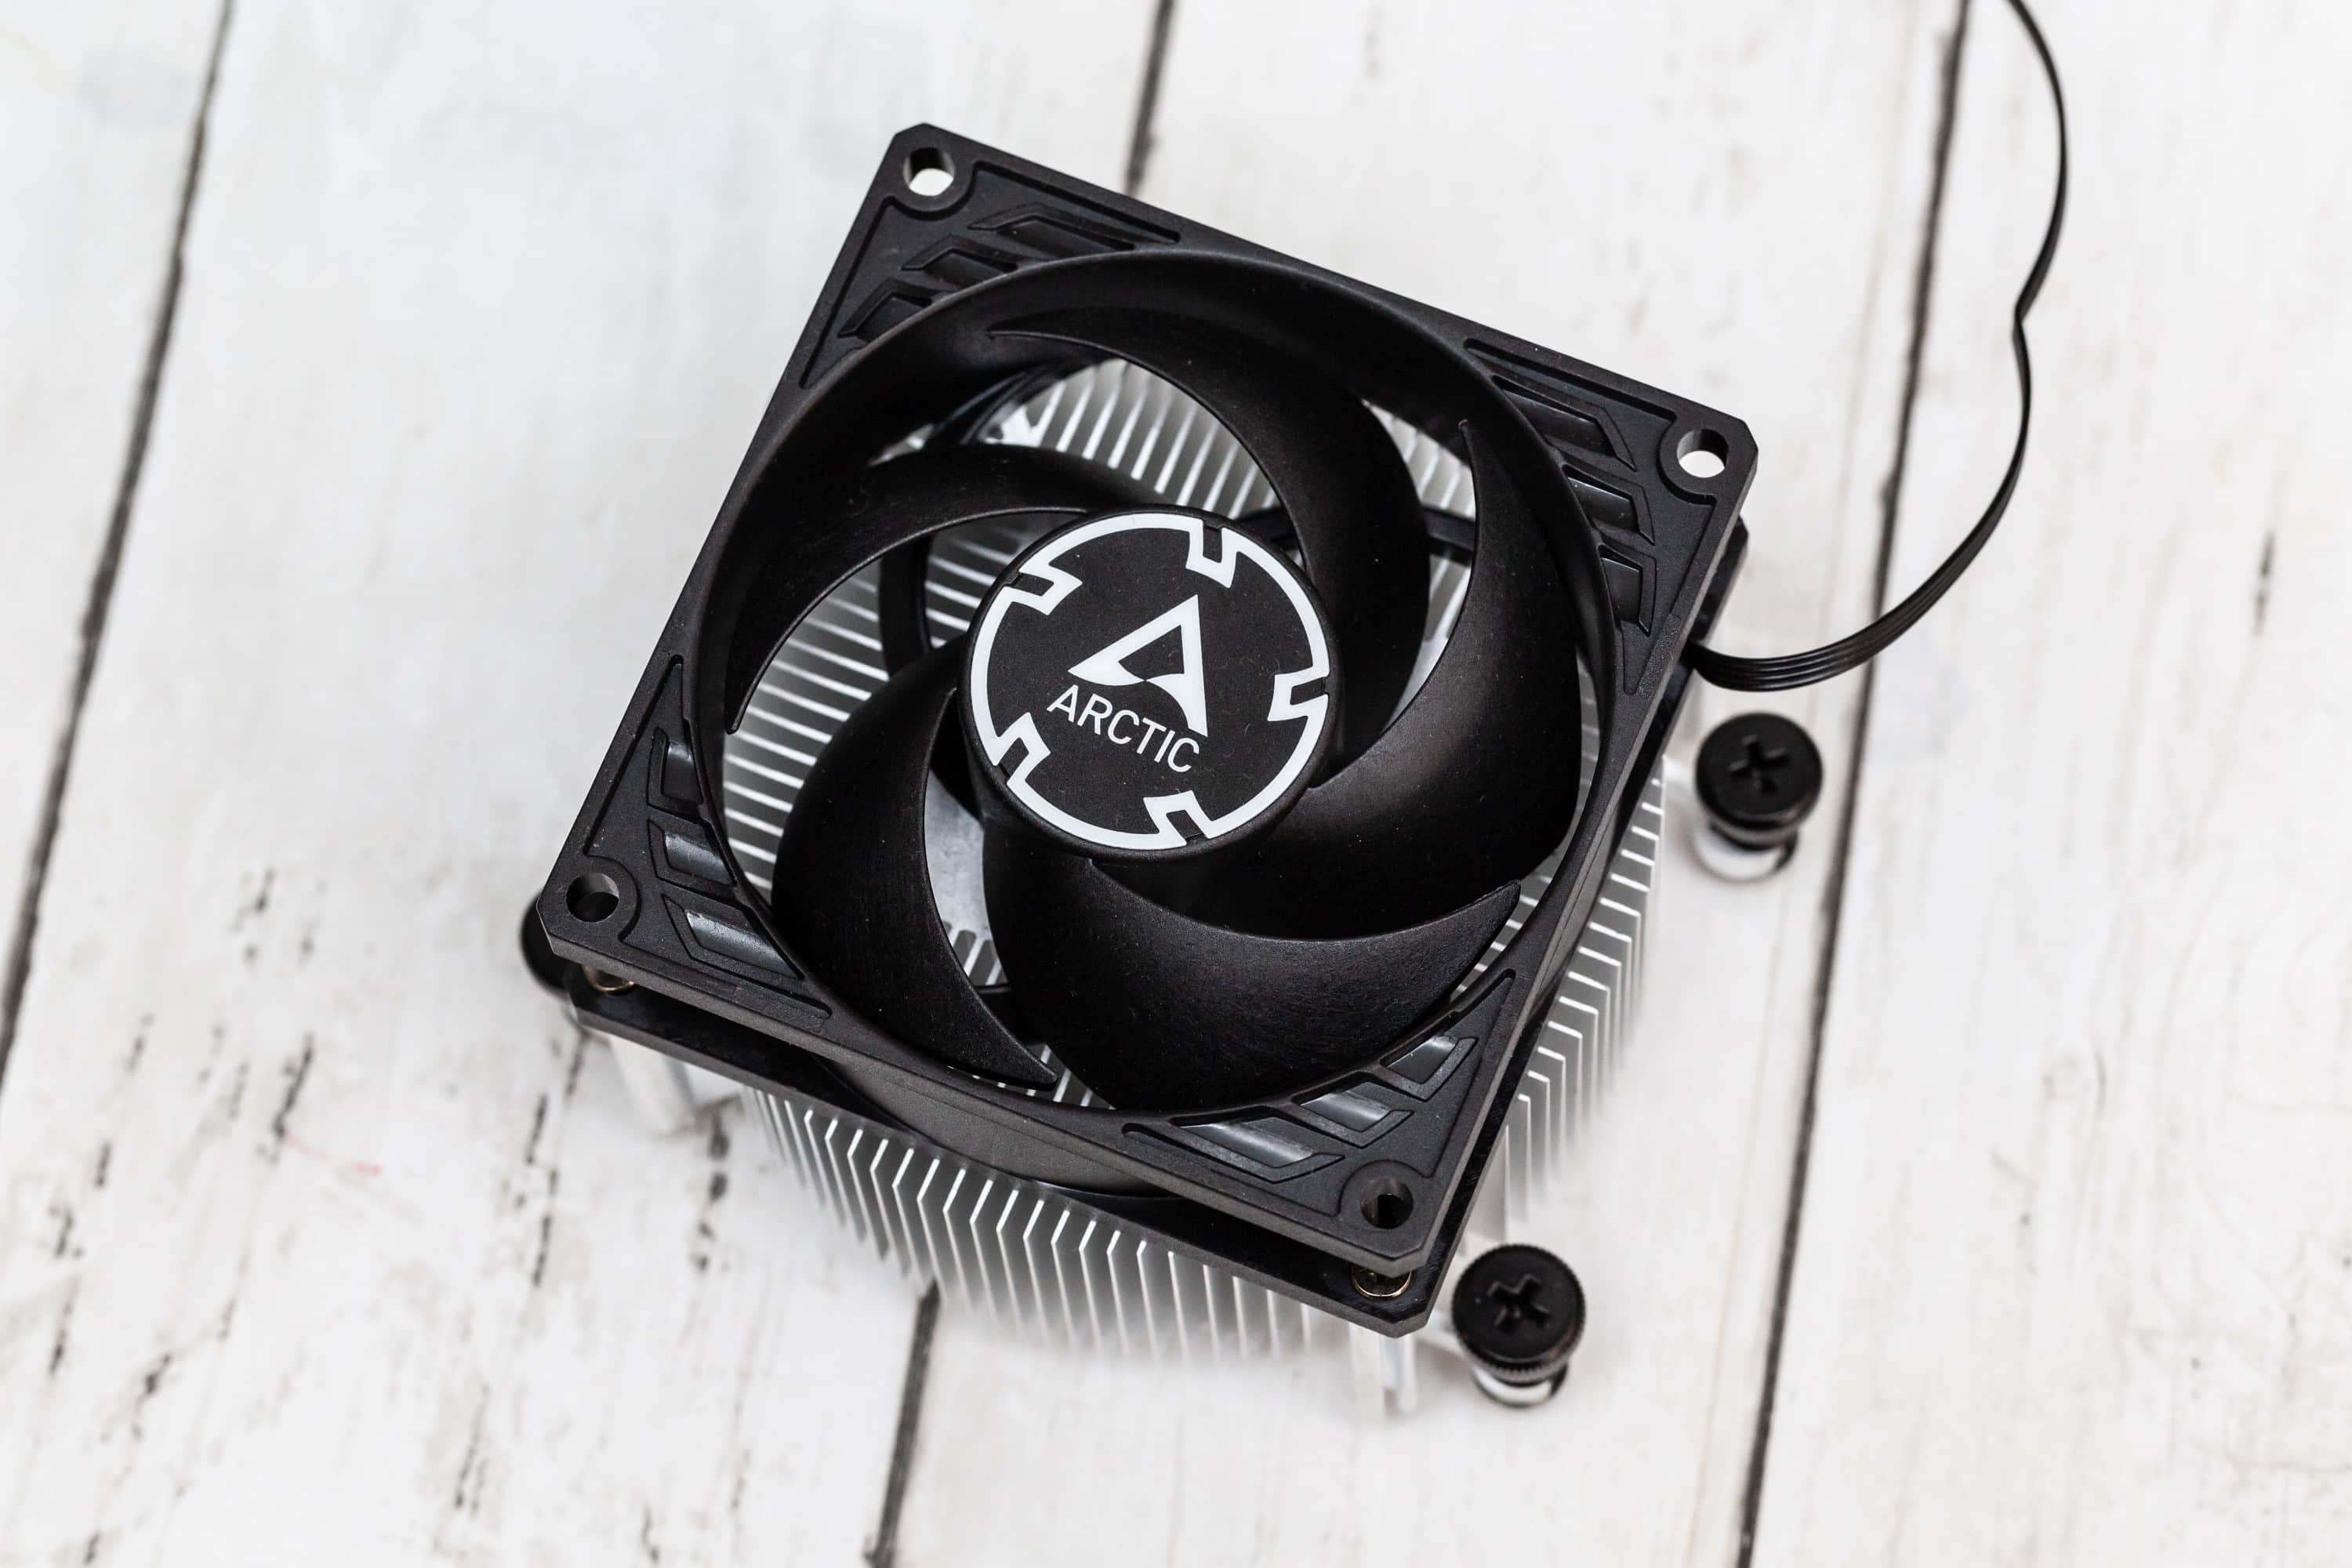 Arctic P8 Max review - high-performance fan in 80 mm